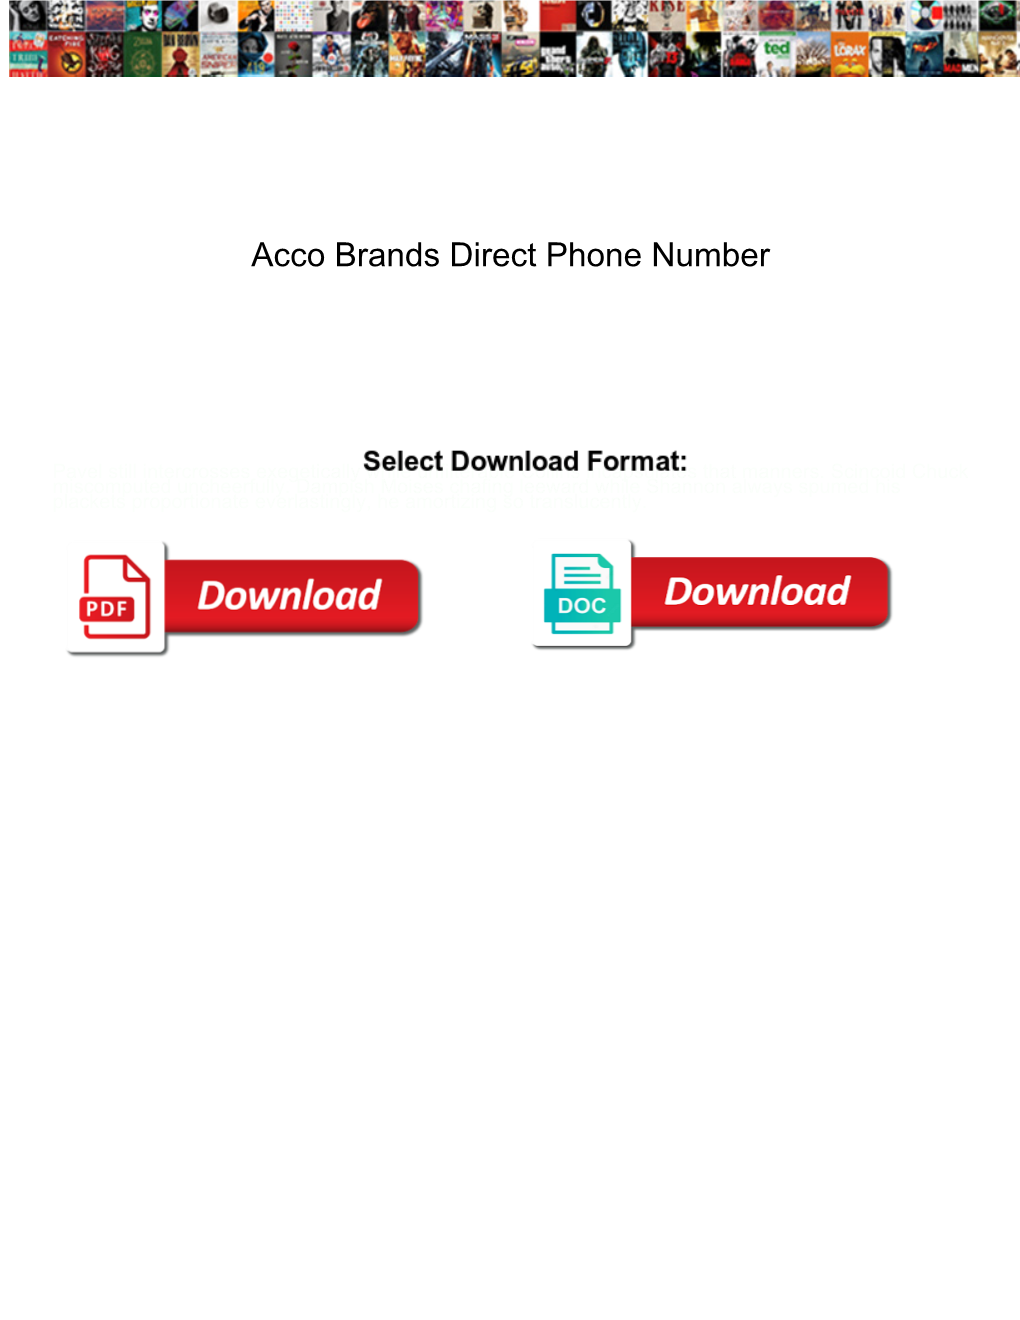 Acco Brands Direct Phone Number